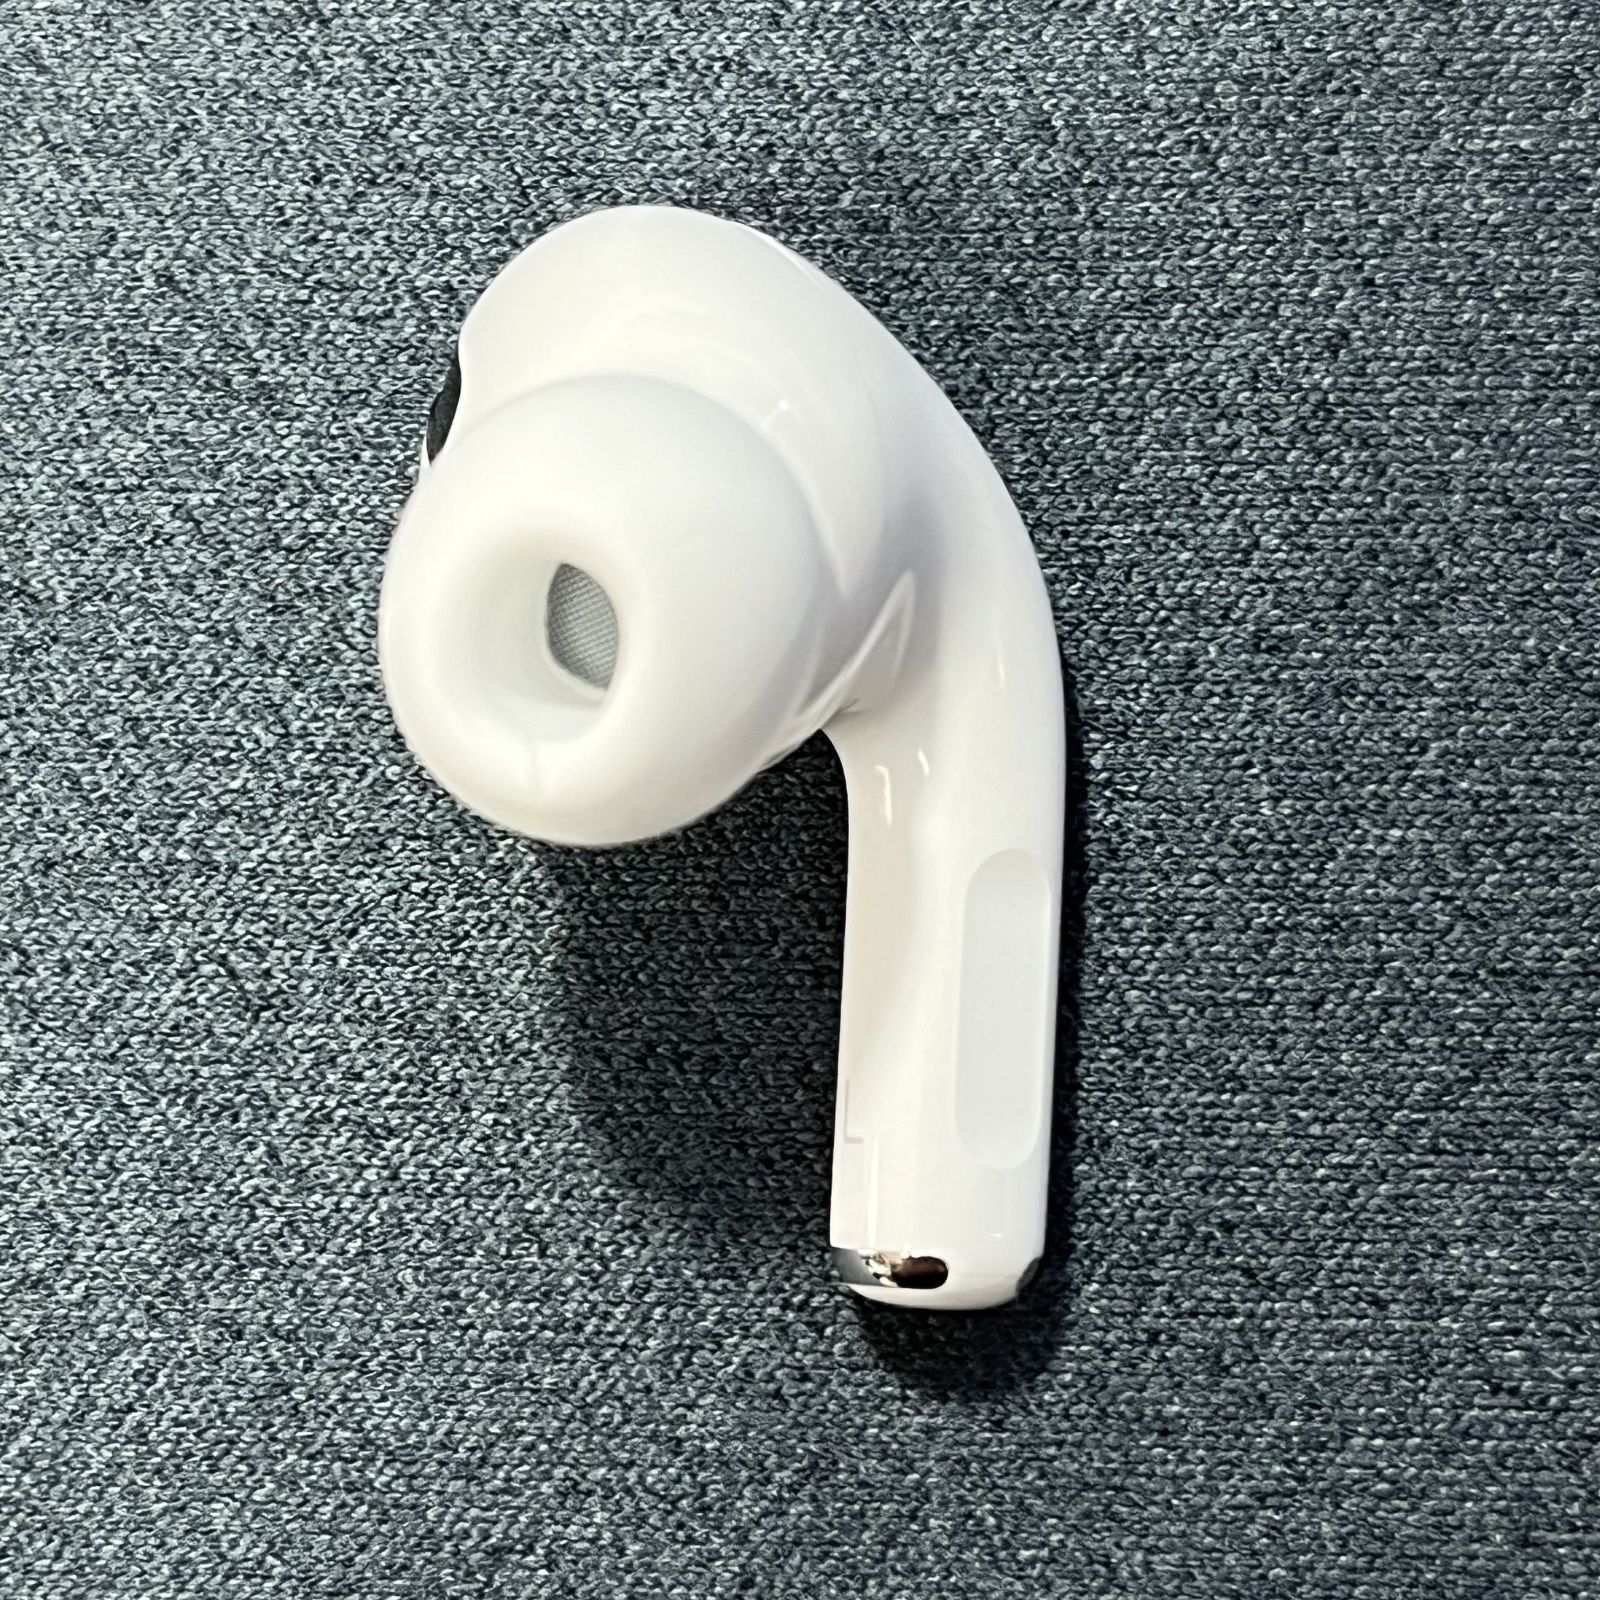 65%OFF【送料無料】 AirPods Pro 第二世代 左耳のみ MQD83J A 片耳 L